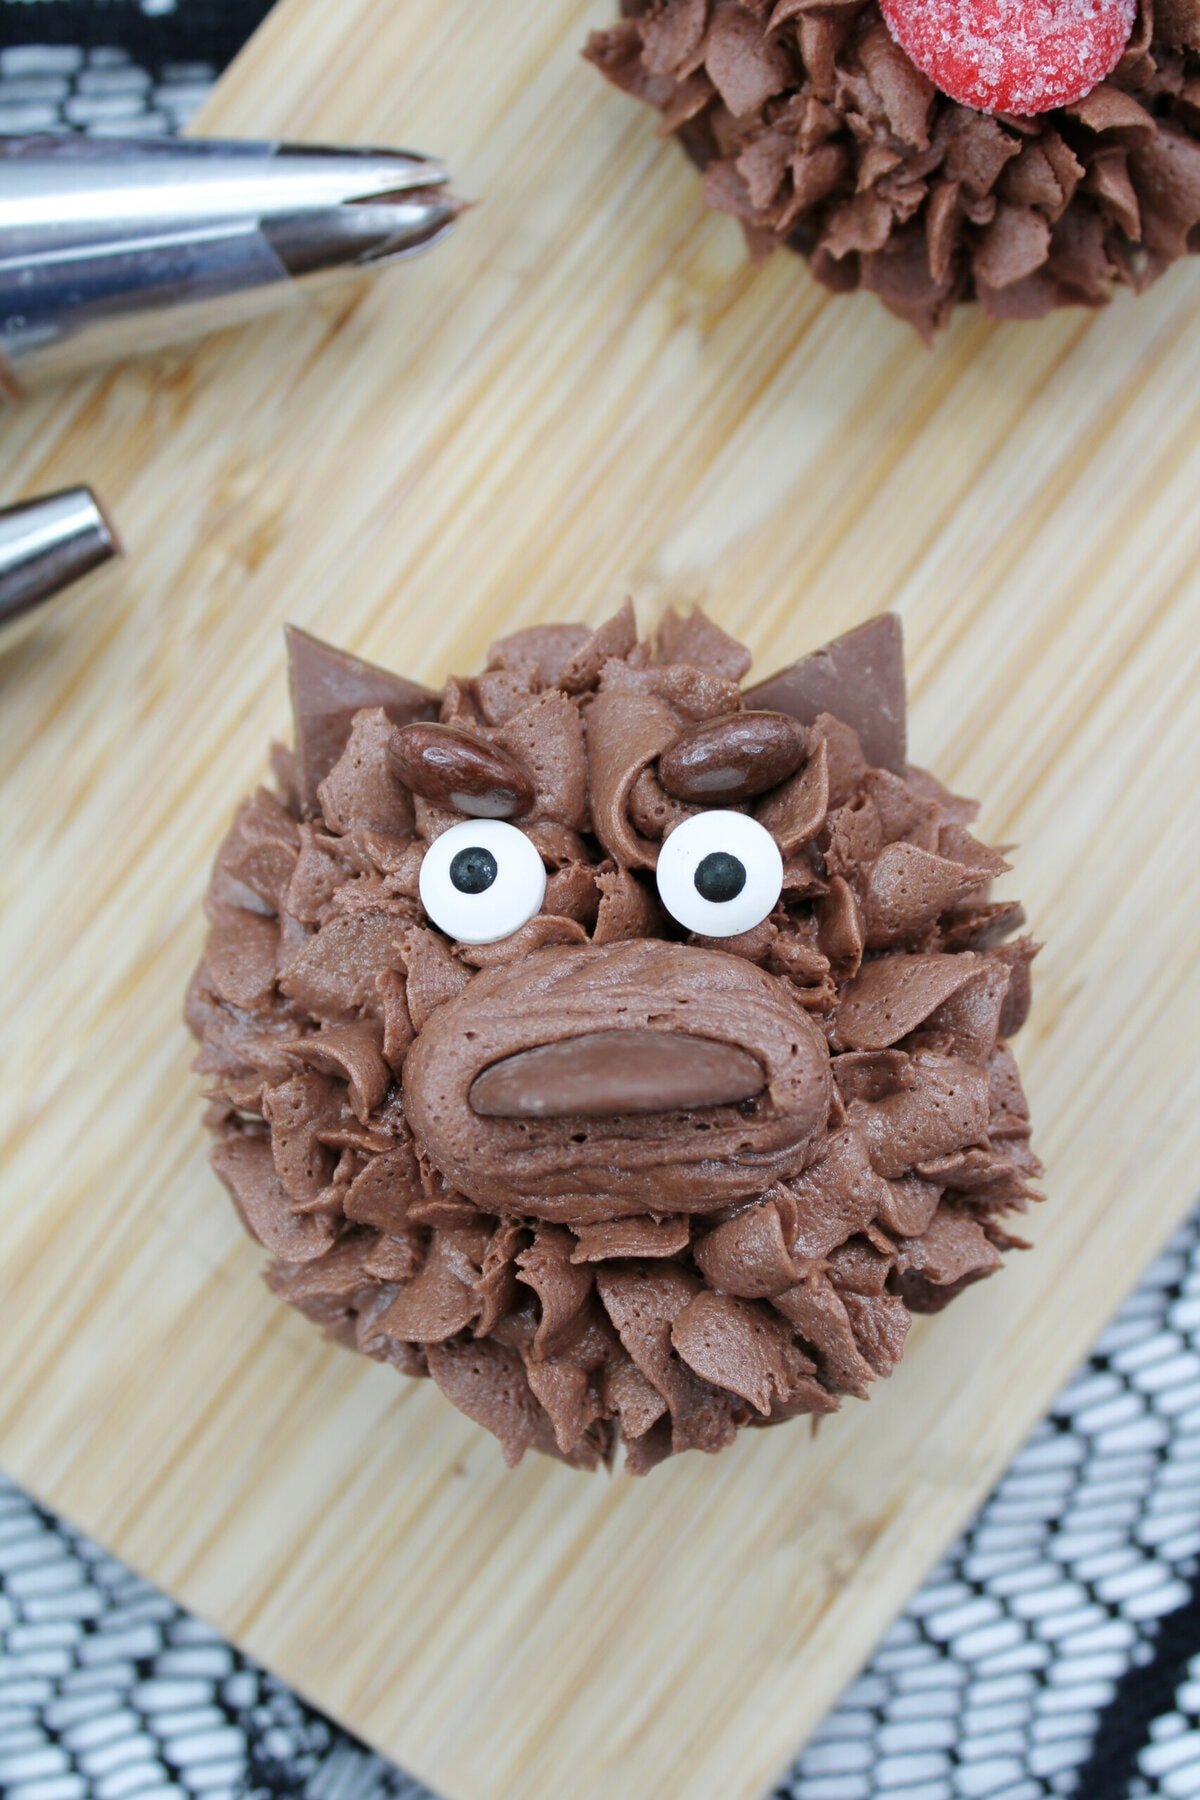 Adding the ears onto the Werewolf Cupcakes.